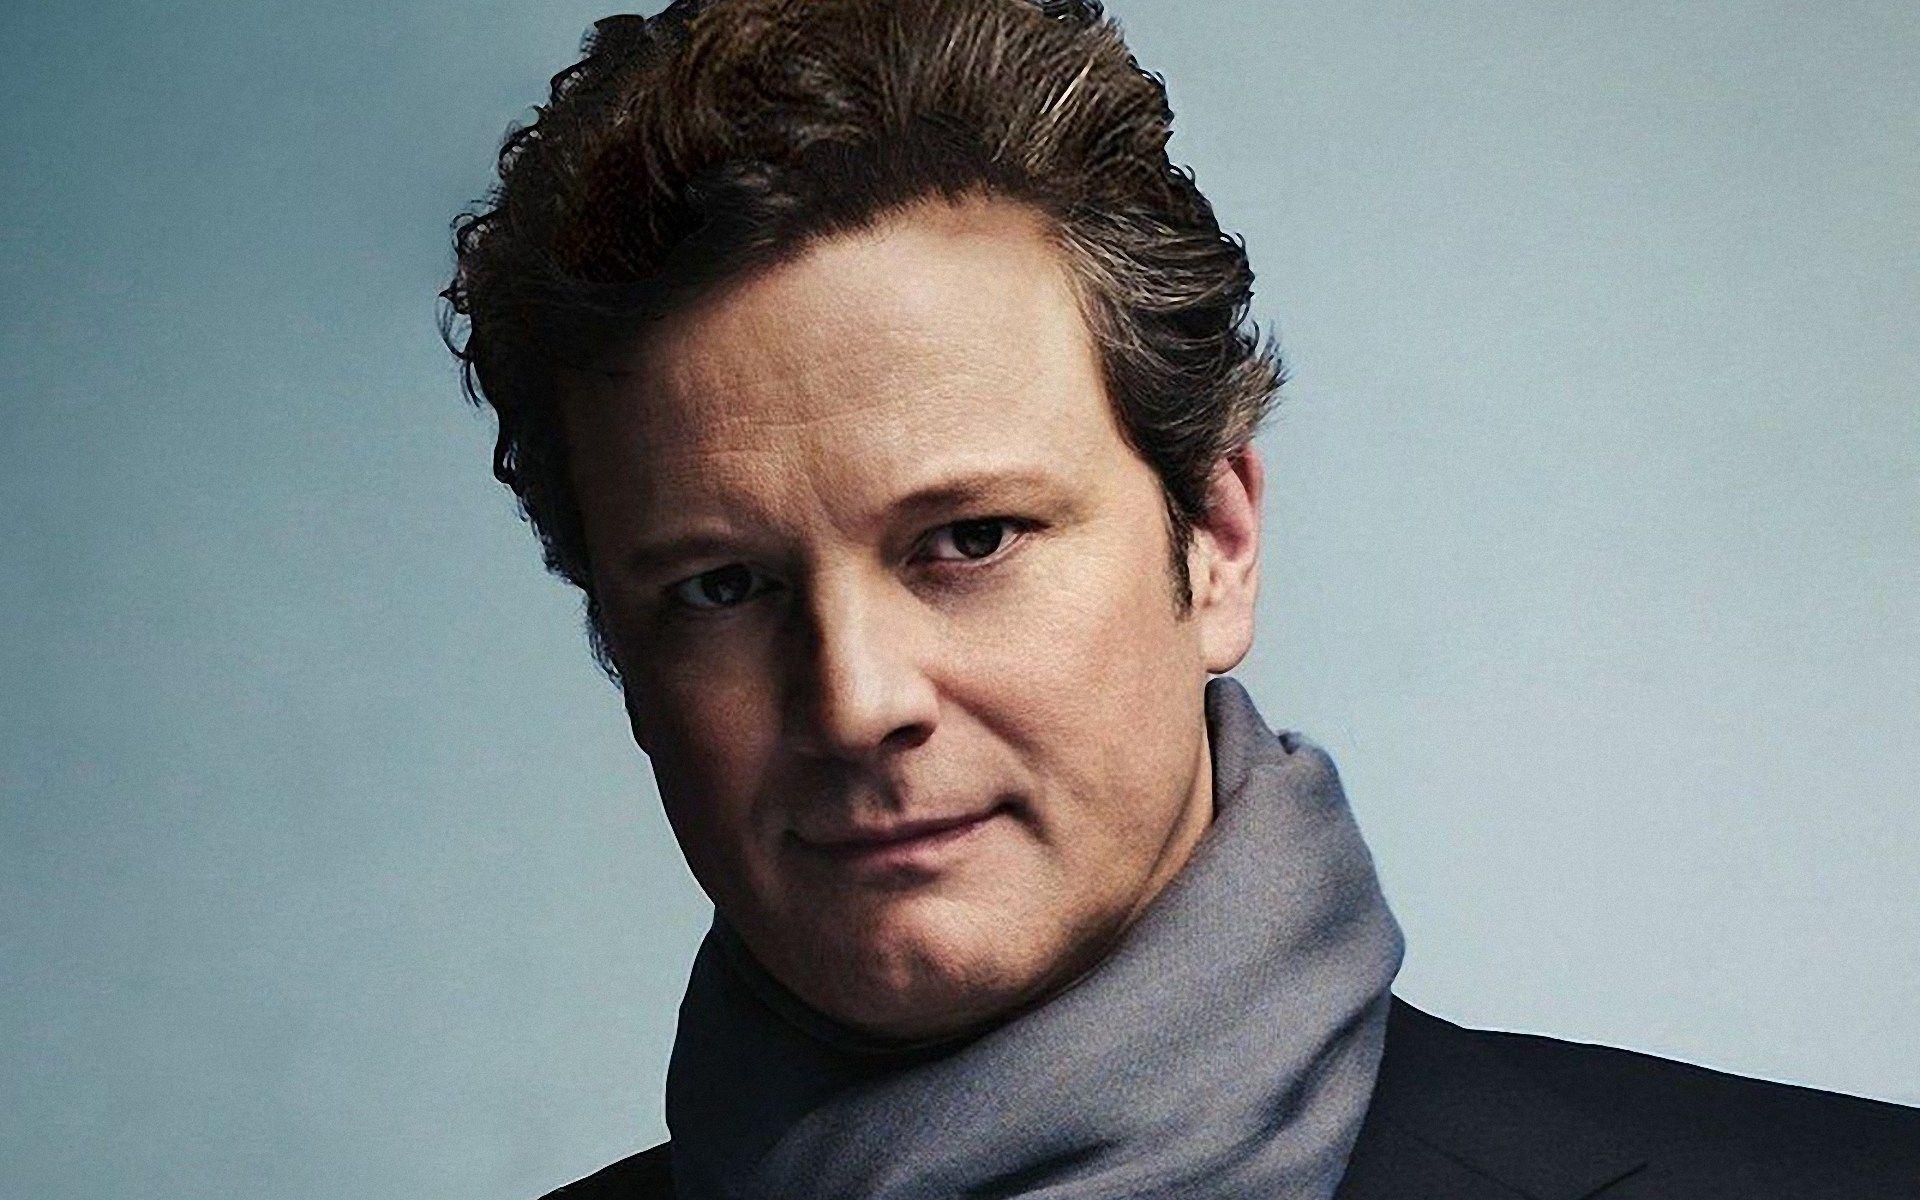 Colin Firth Wallpaper High Resolution and Quality Download. Man